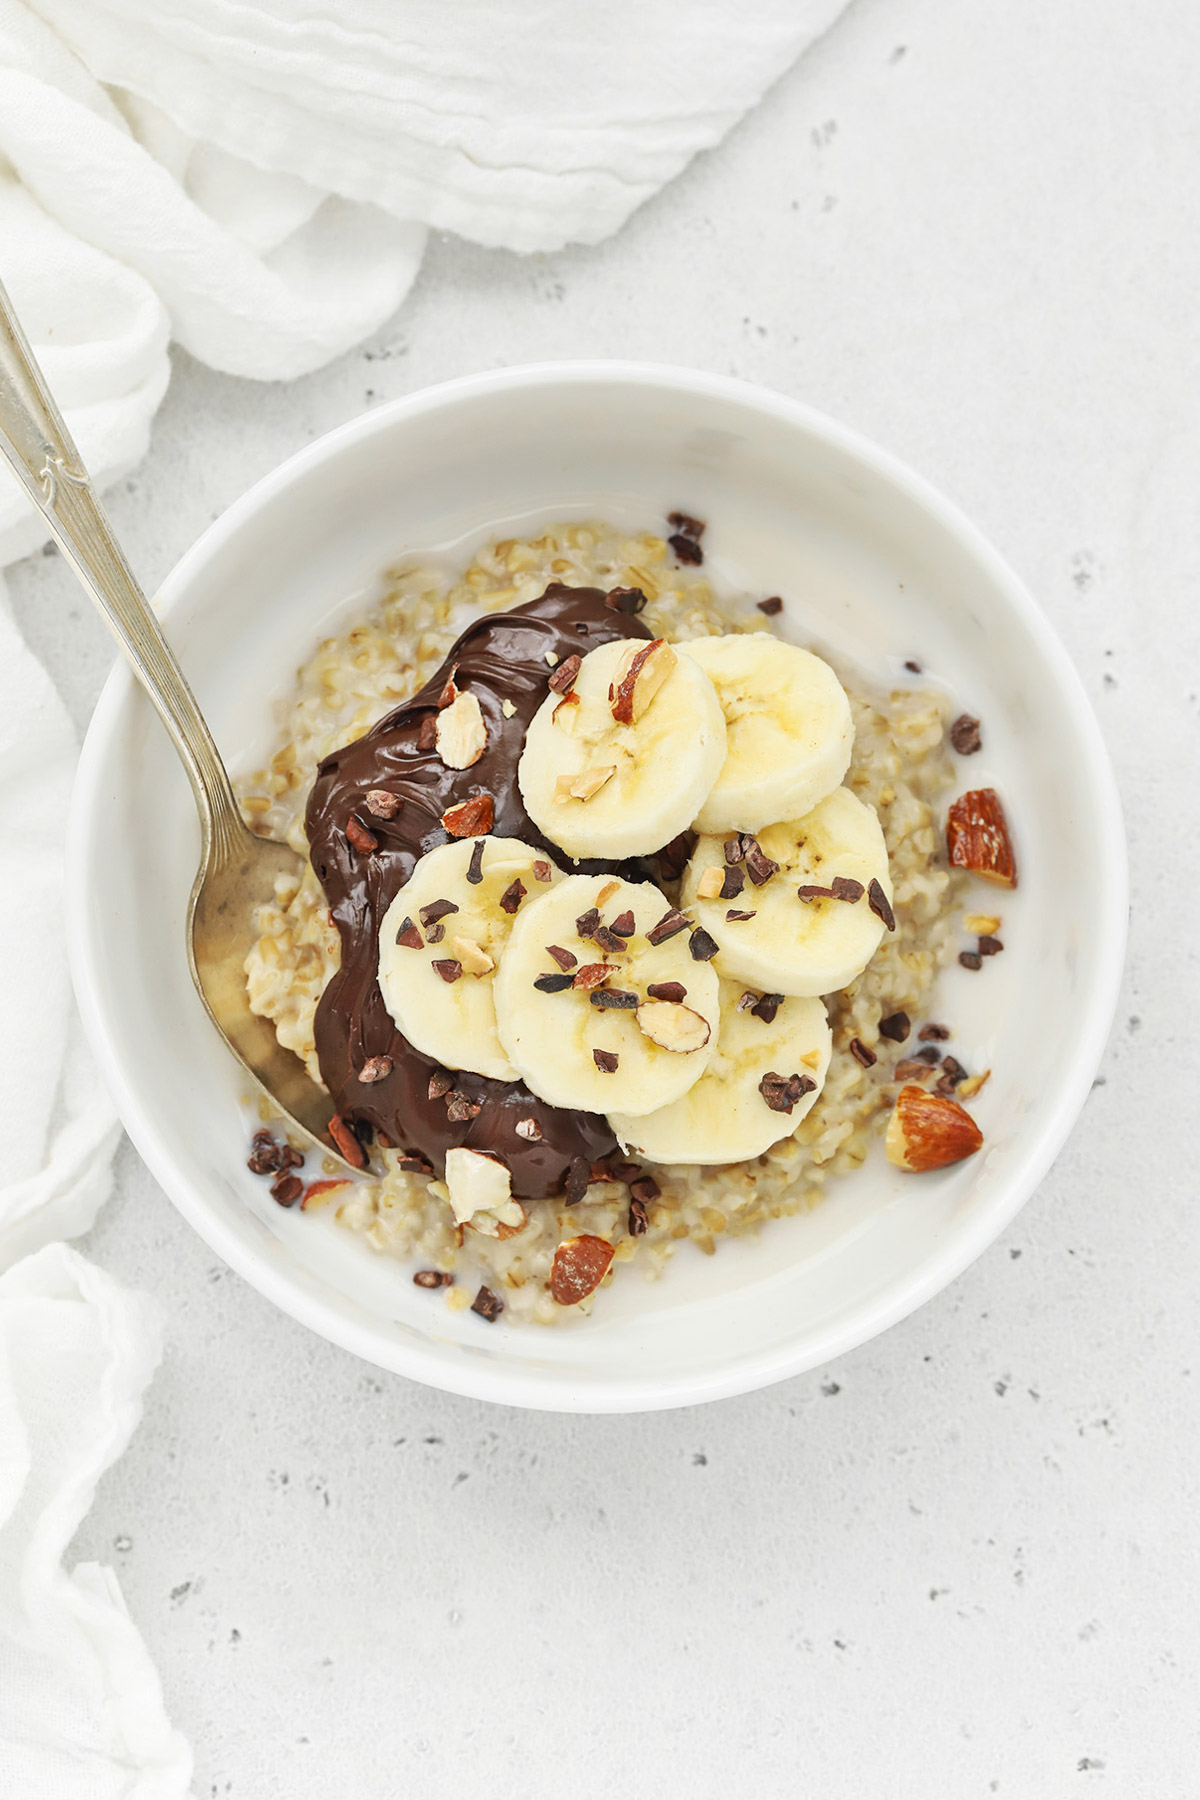 Overhead view of steel-cut oats topped with nutella, bananas, and chopped nuts